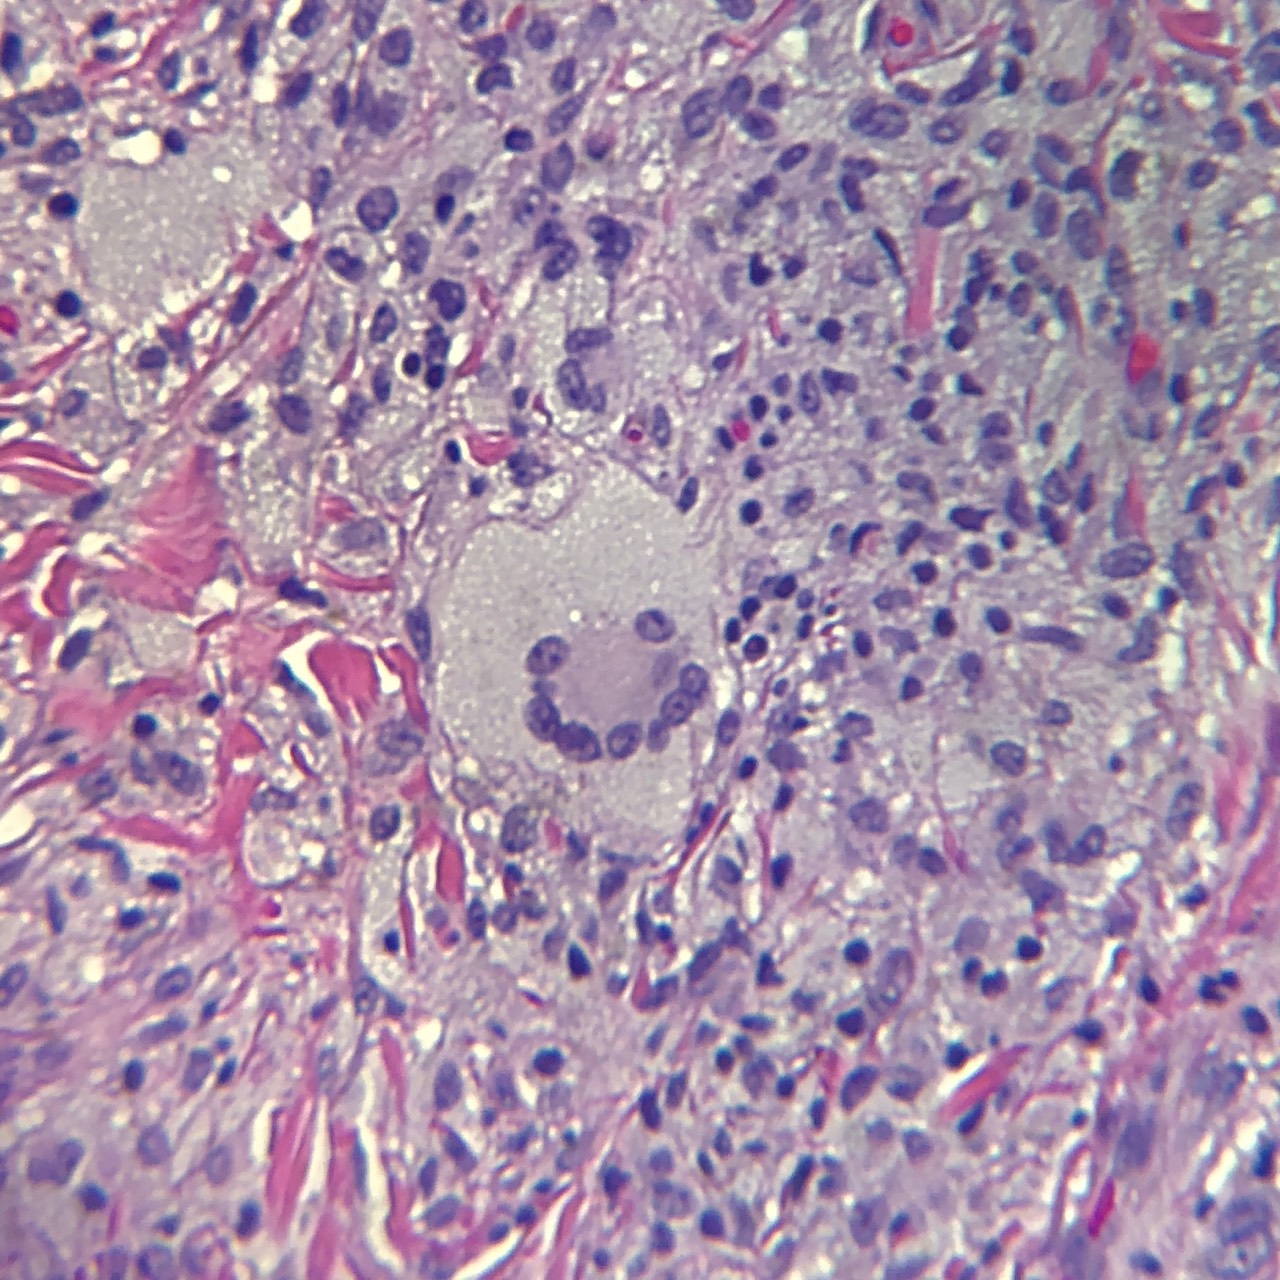 Classic multinucleated (Touton) giant cell of juvenile xanthogranuloma (JXG).